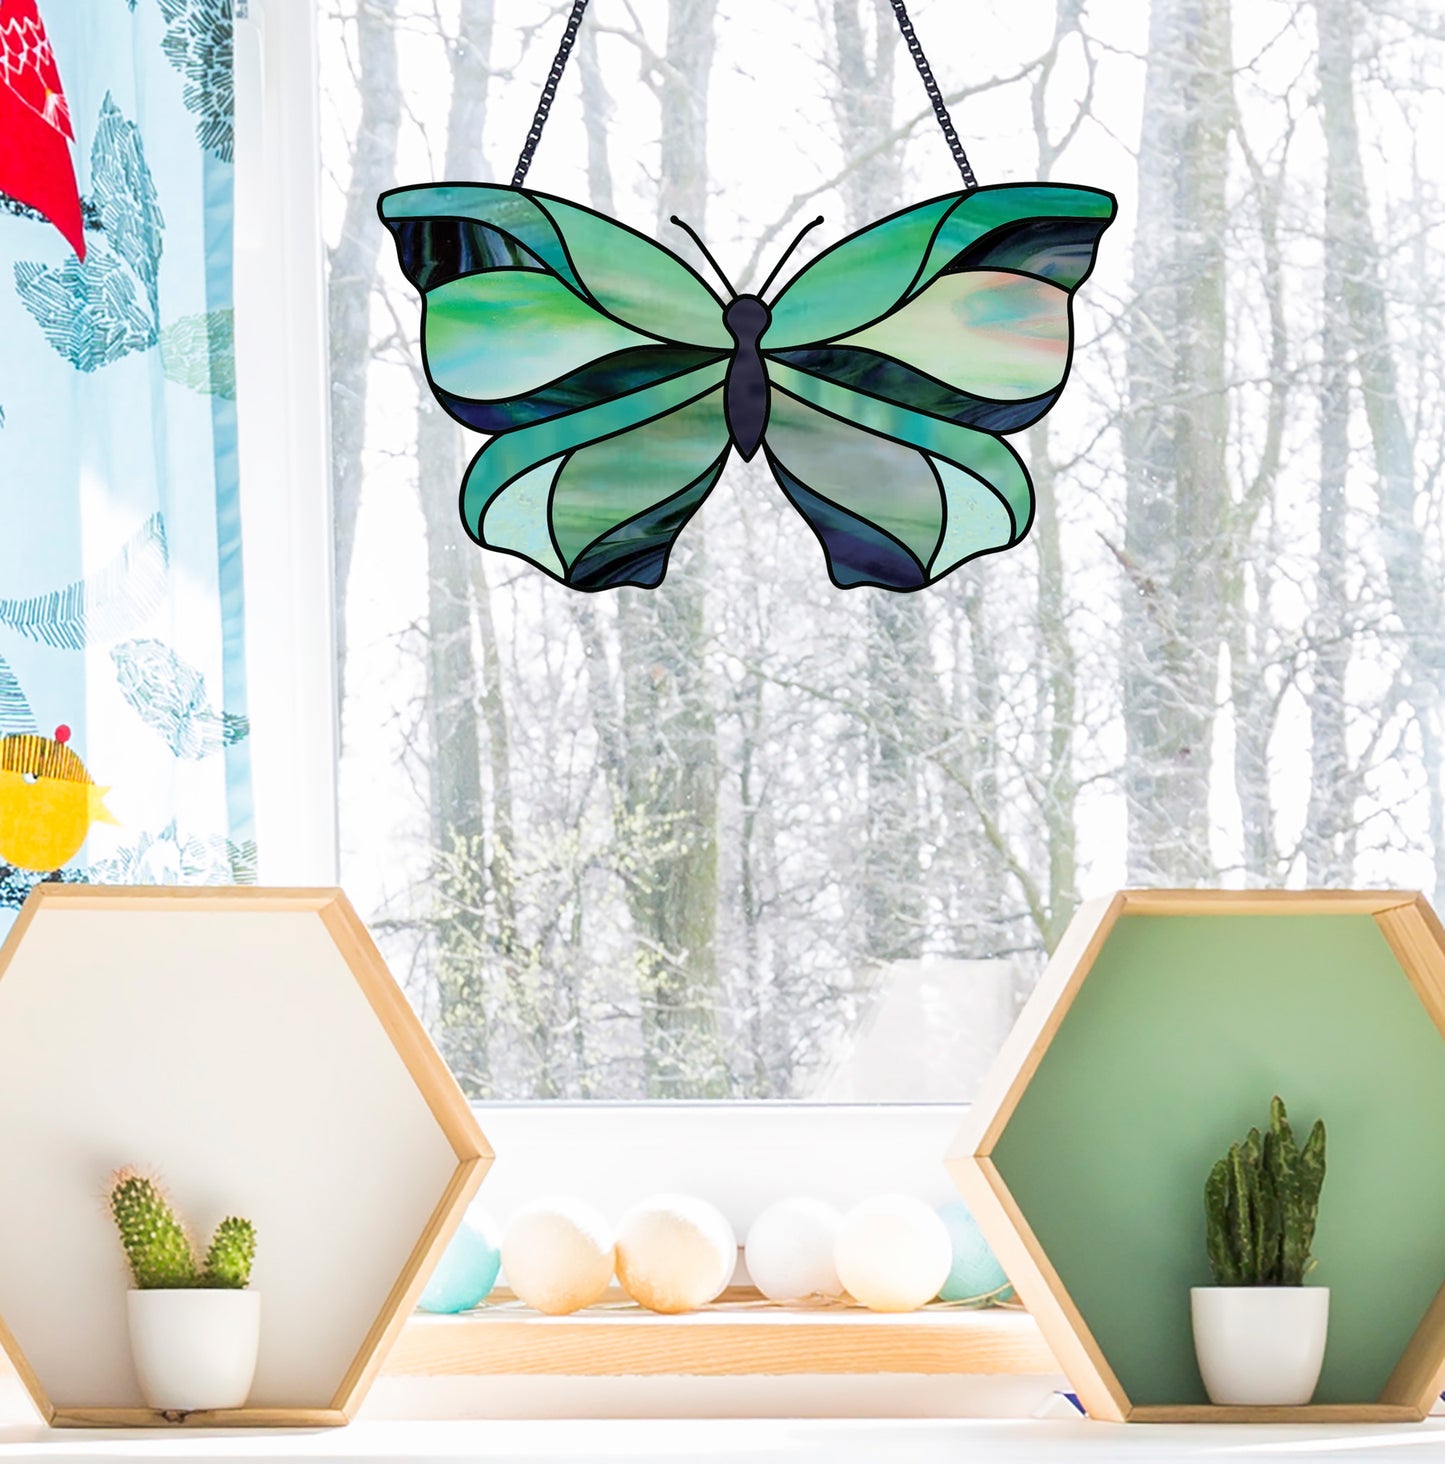 Butterfly stained glass pattern, instant PDF download, shown in winter window